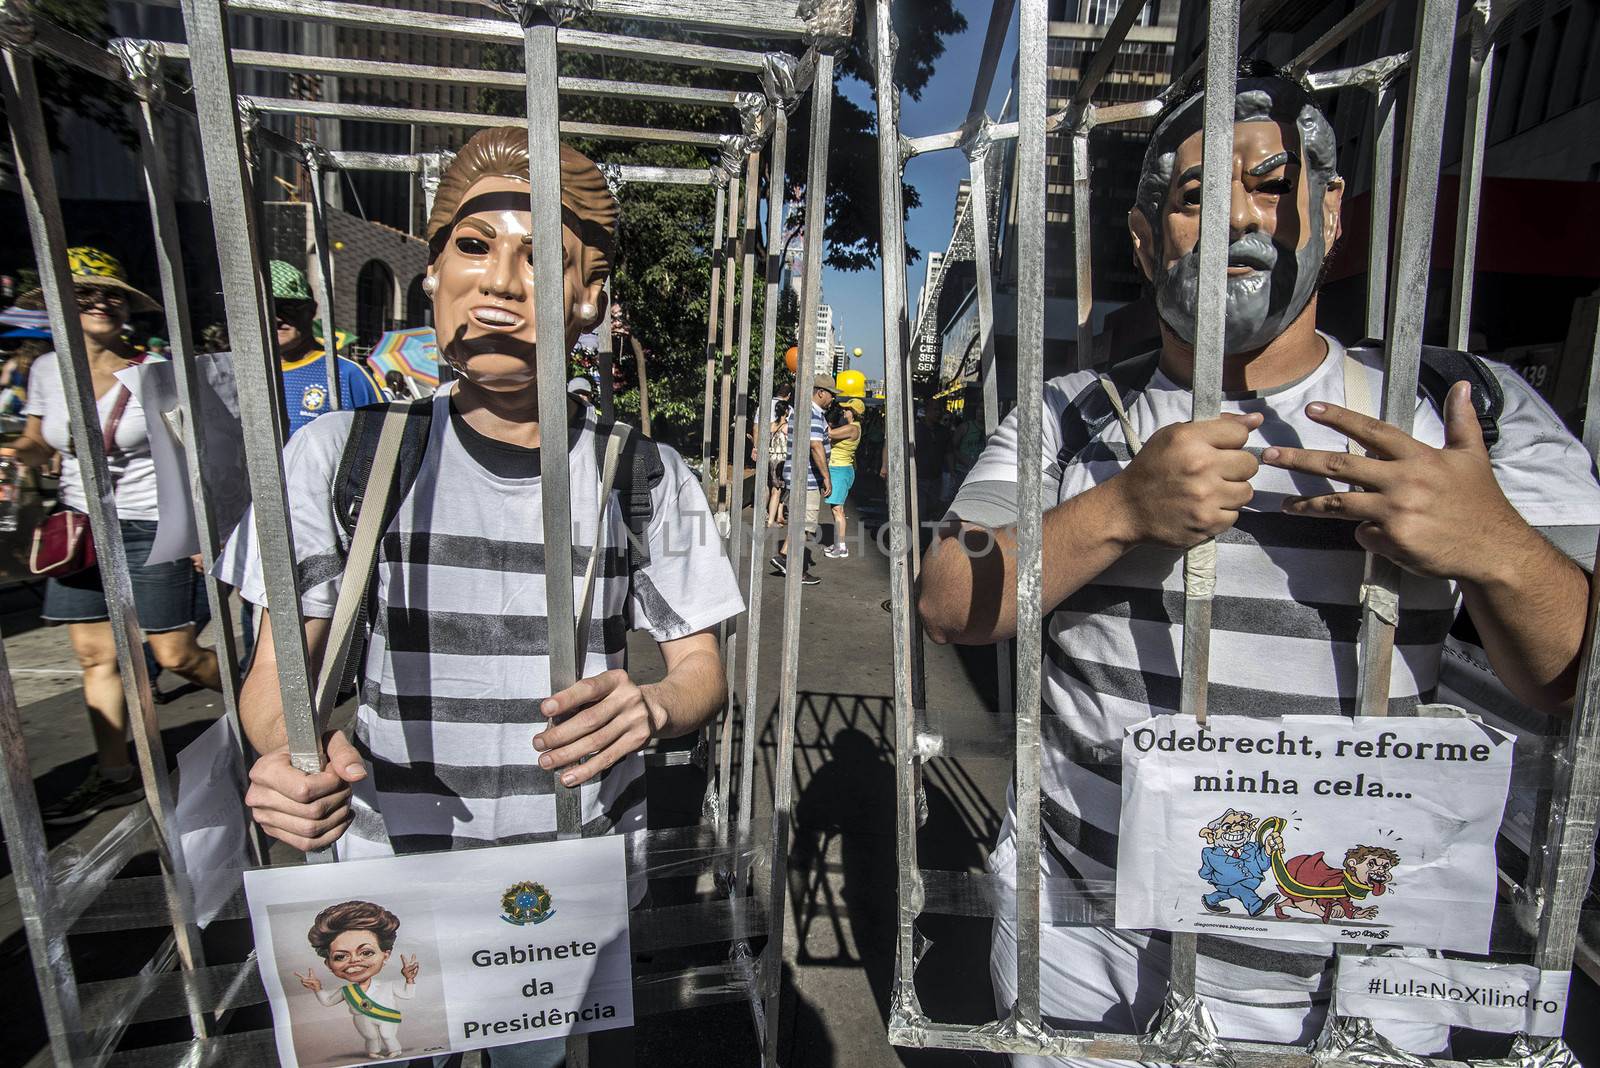 BRAZIl, Sao Paulo: Activists supporting the impeachment of President Dilma Rousseff take part in a protest in Sao Paulo, on April 17, 2016. Brazilian lawmakers on Sunday reached the two thirds majority necessary to authorize impeachment proceedings against President Dilma Rousseff. The lower house vote sends Rousseff's case to the Senate, which can vote to open a trial. A two thirds majority in the upper house would eject her from office. Rousseff, whose approval rating has plunged to a dismal 10 percent, faces charges of embellishing public accounts to mask the budget deficit during her 2014 reelection.